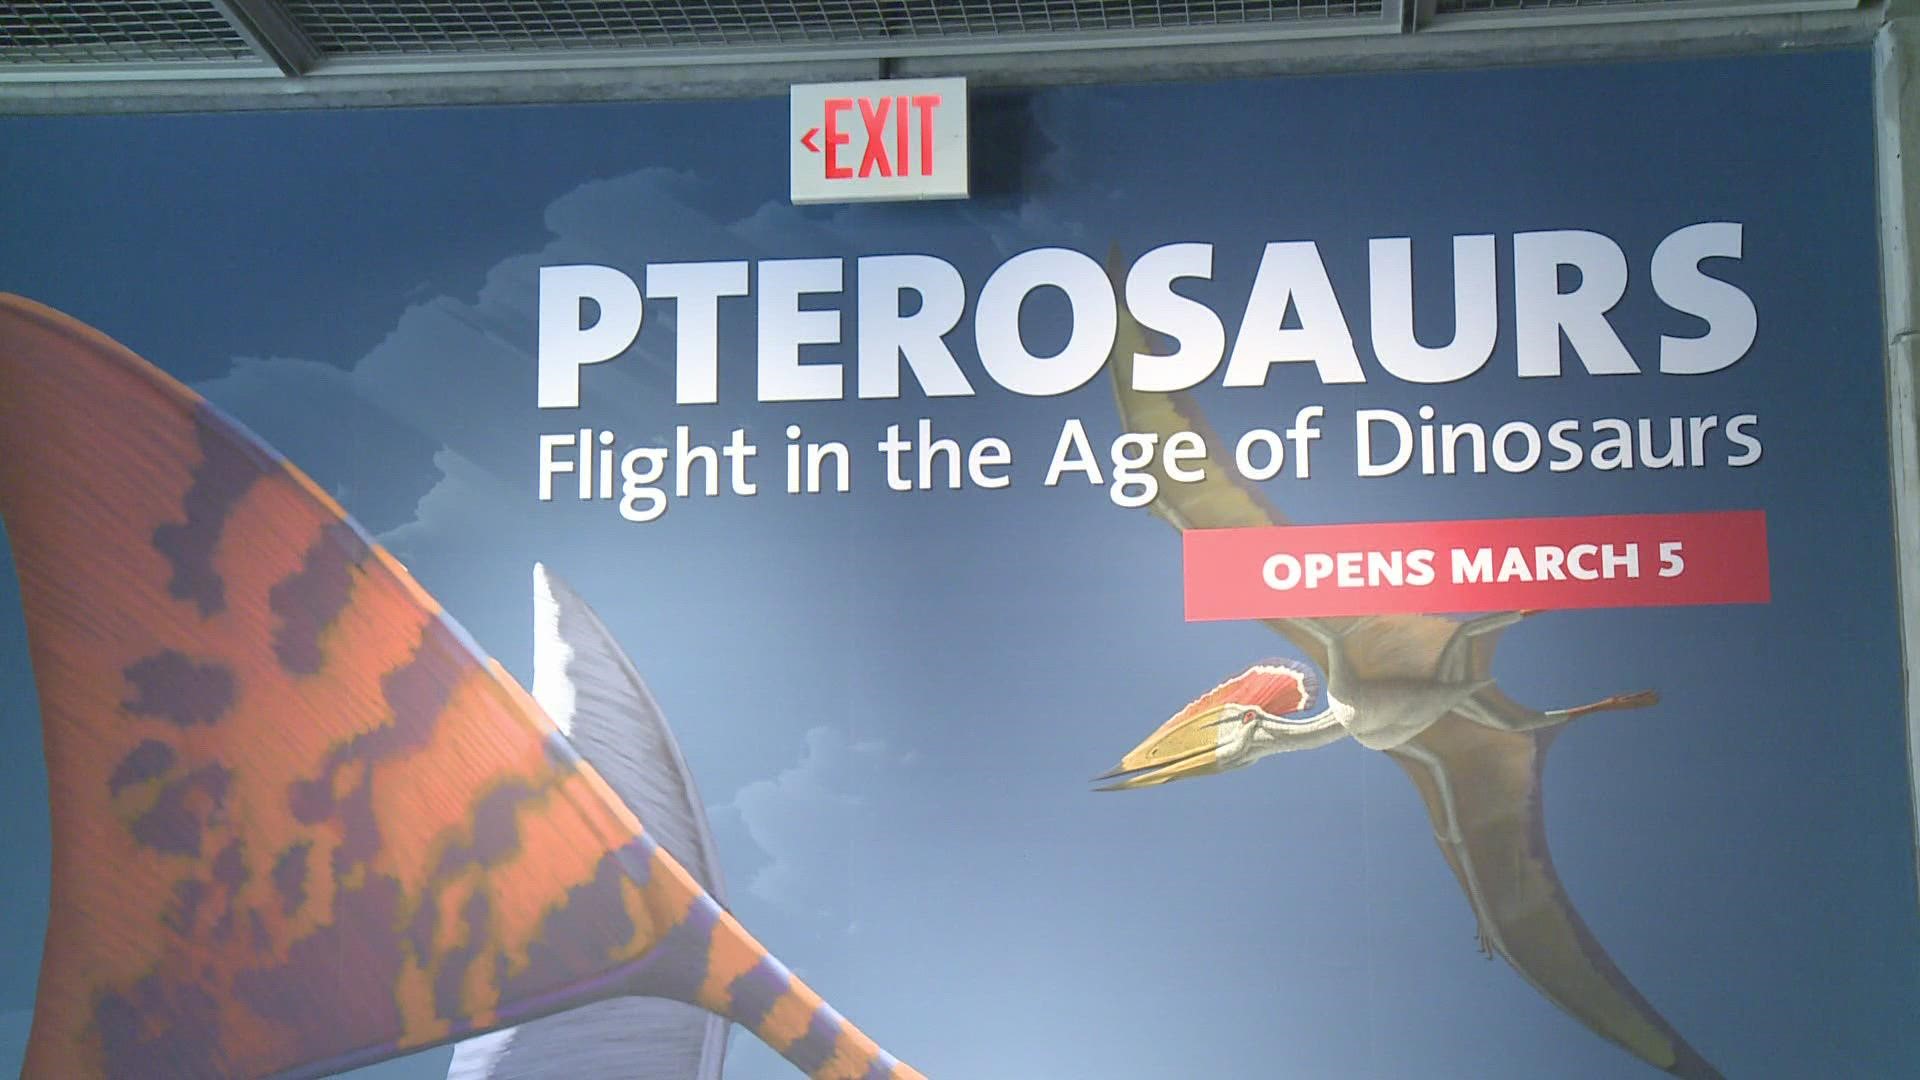 Pterosaurs: Flight in the Age of Dinosaurs highlights research done by scientists about more than 150 species of pterosaurs.